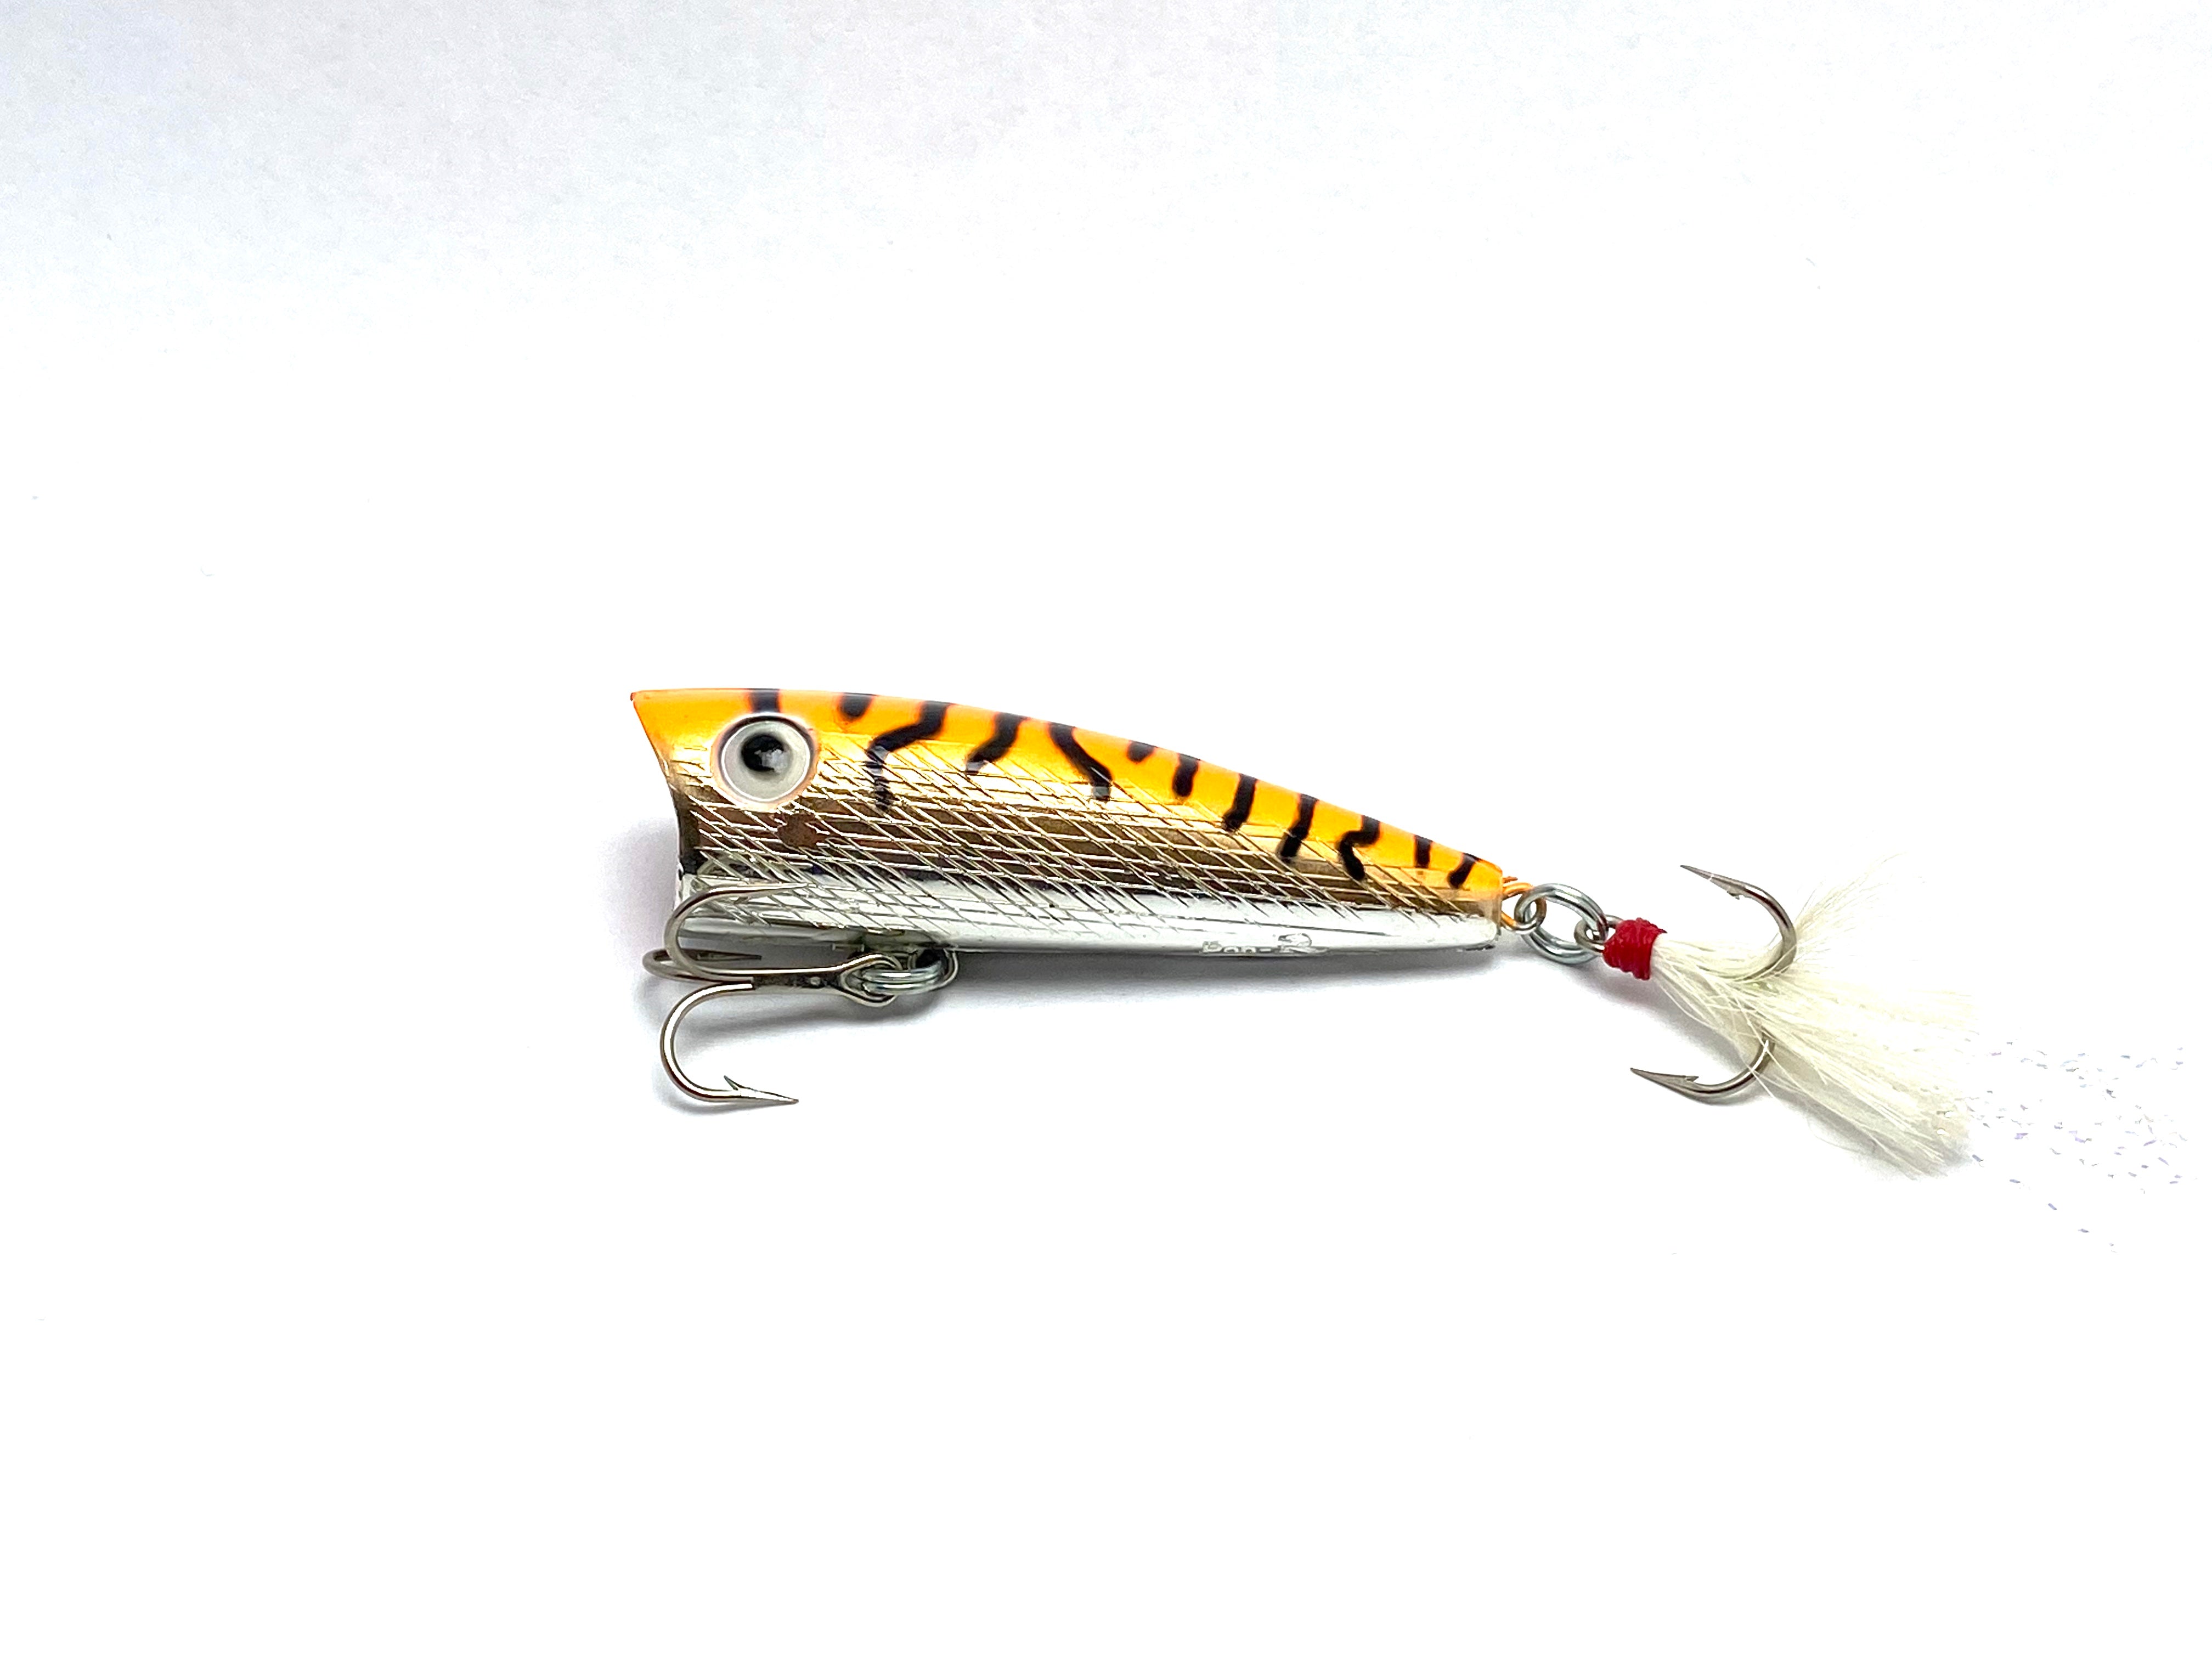 Rebel Striped Bass Vintage Fishing Lures for sale